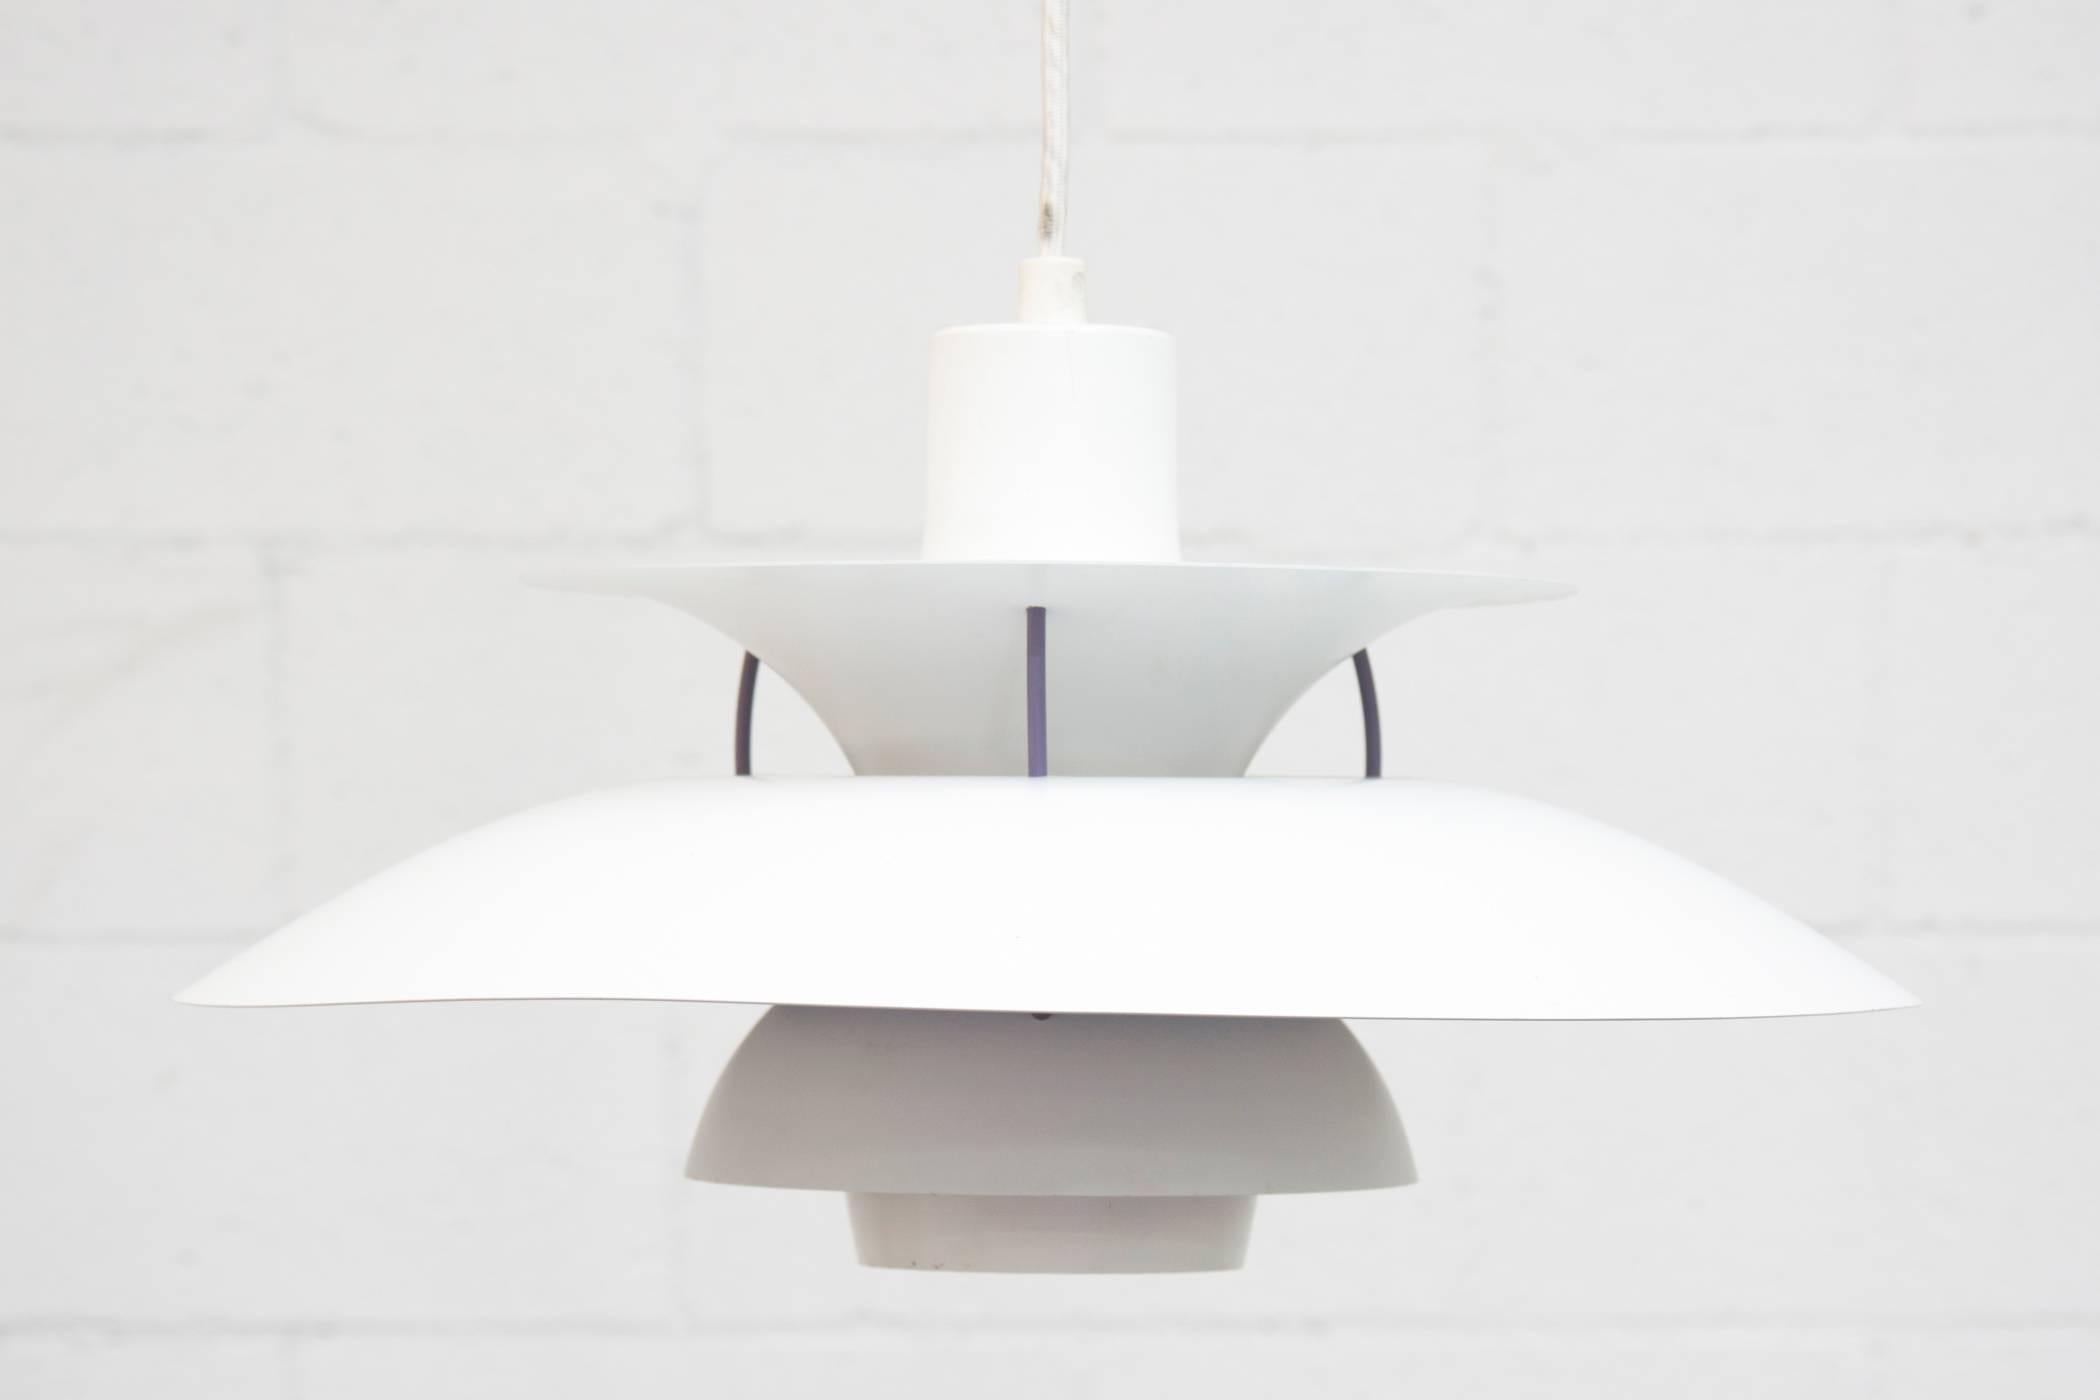 Designed in 1958 by Poul Henningsen as a versatile light fixture. The multiple shade design allows light to be channeled downwards and lengthen sideways. Bone white spun aluminum with violet accent. Original condition, some wear, minimal paint loss.